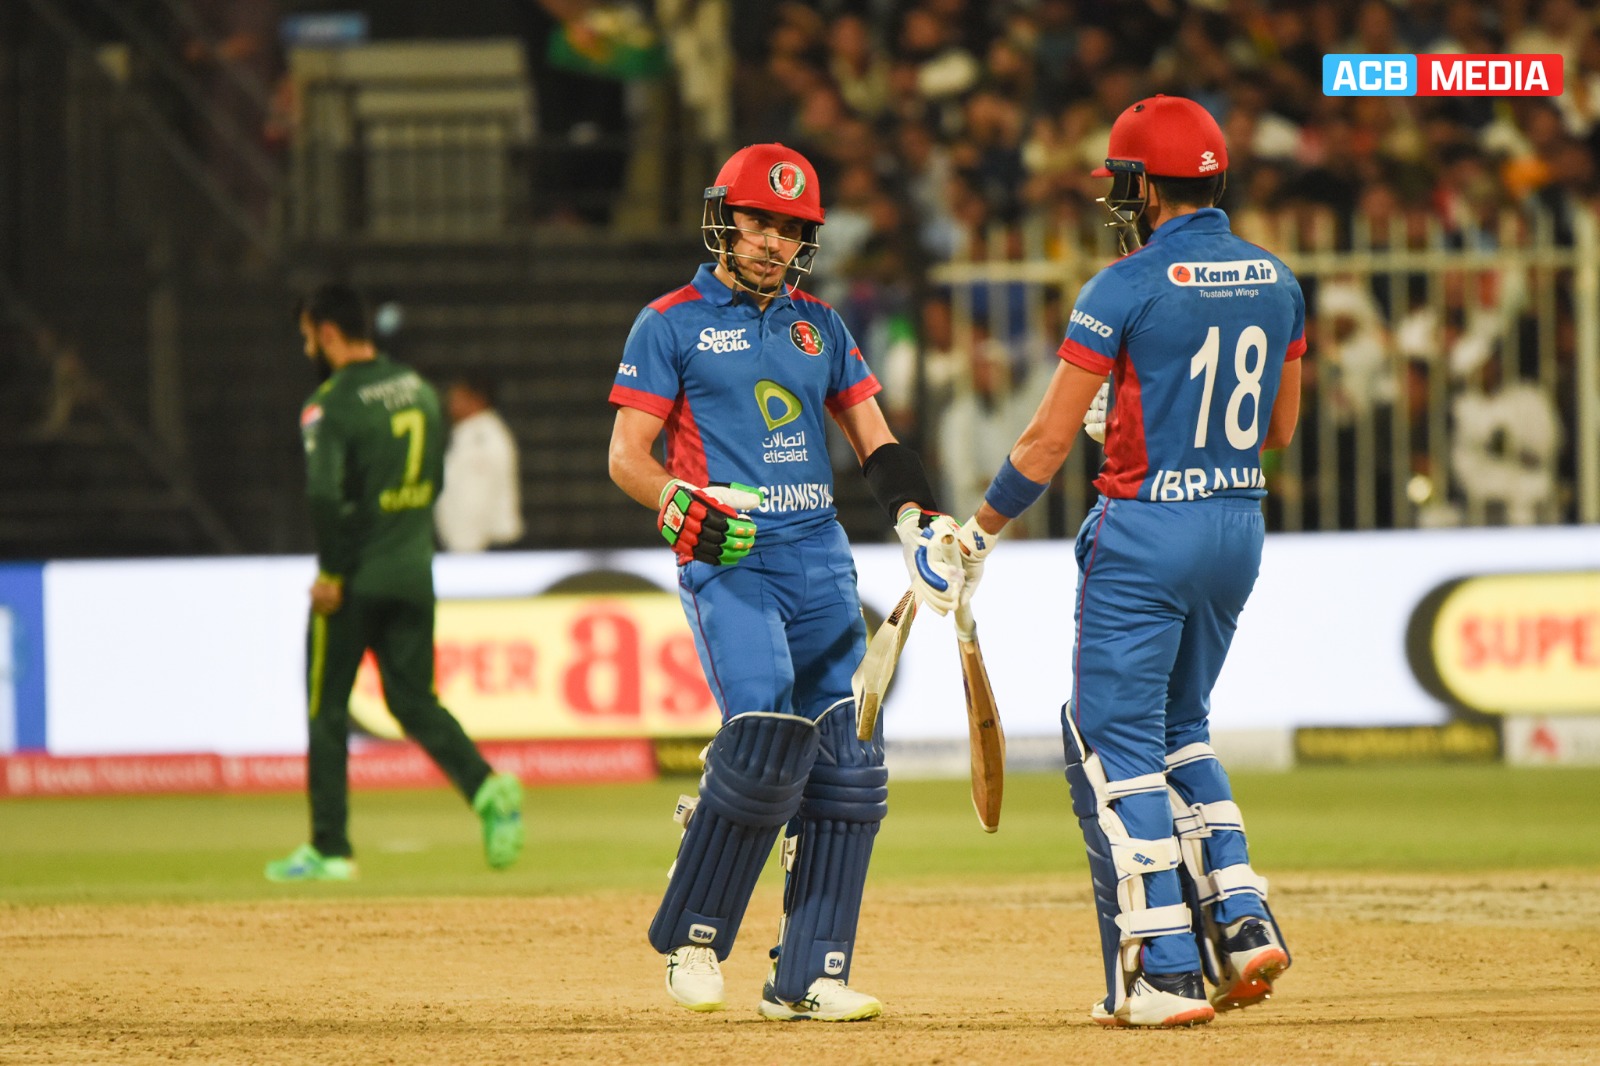 PAK vs AFG HIGHLIGHTS: Afghanistan registers HISTORIC WIN by 6 wickets, hosts BEAT Pakistan first time ever to take 1-0 lead in Series - Check Highlights